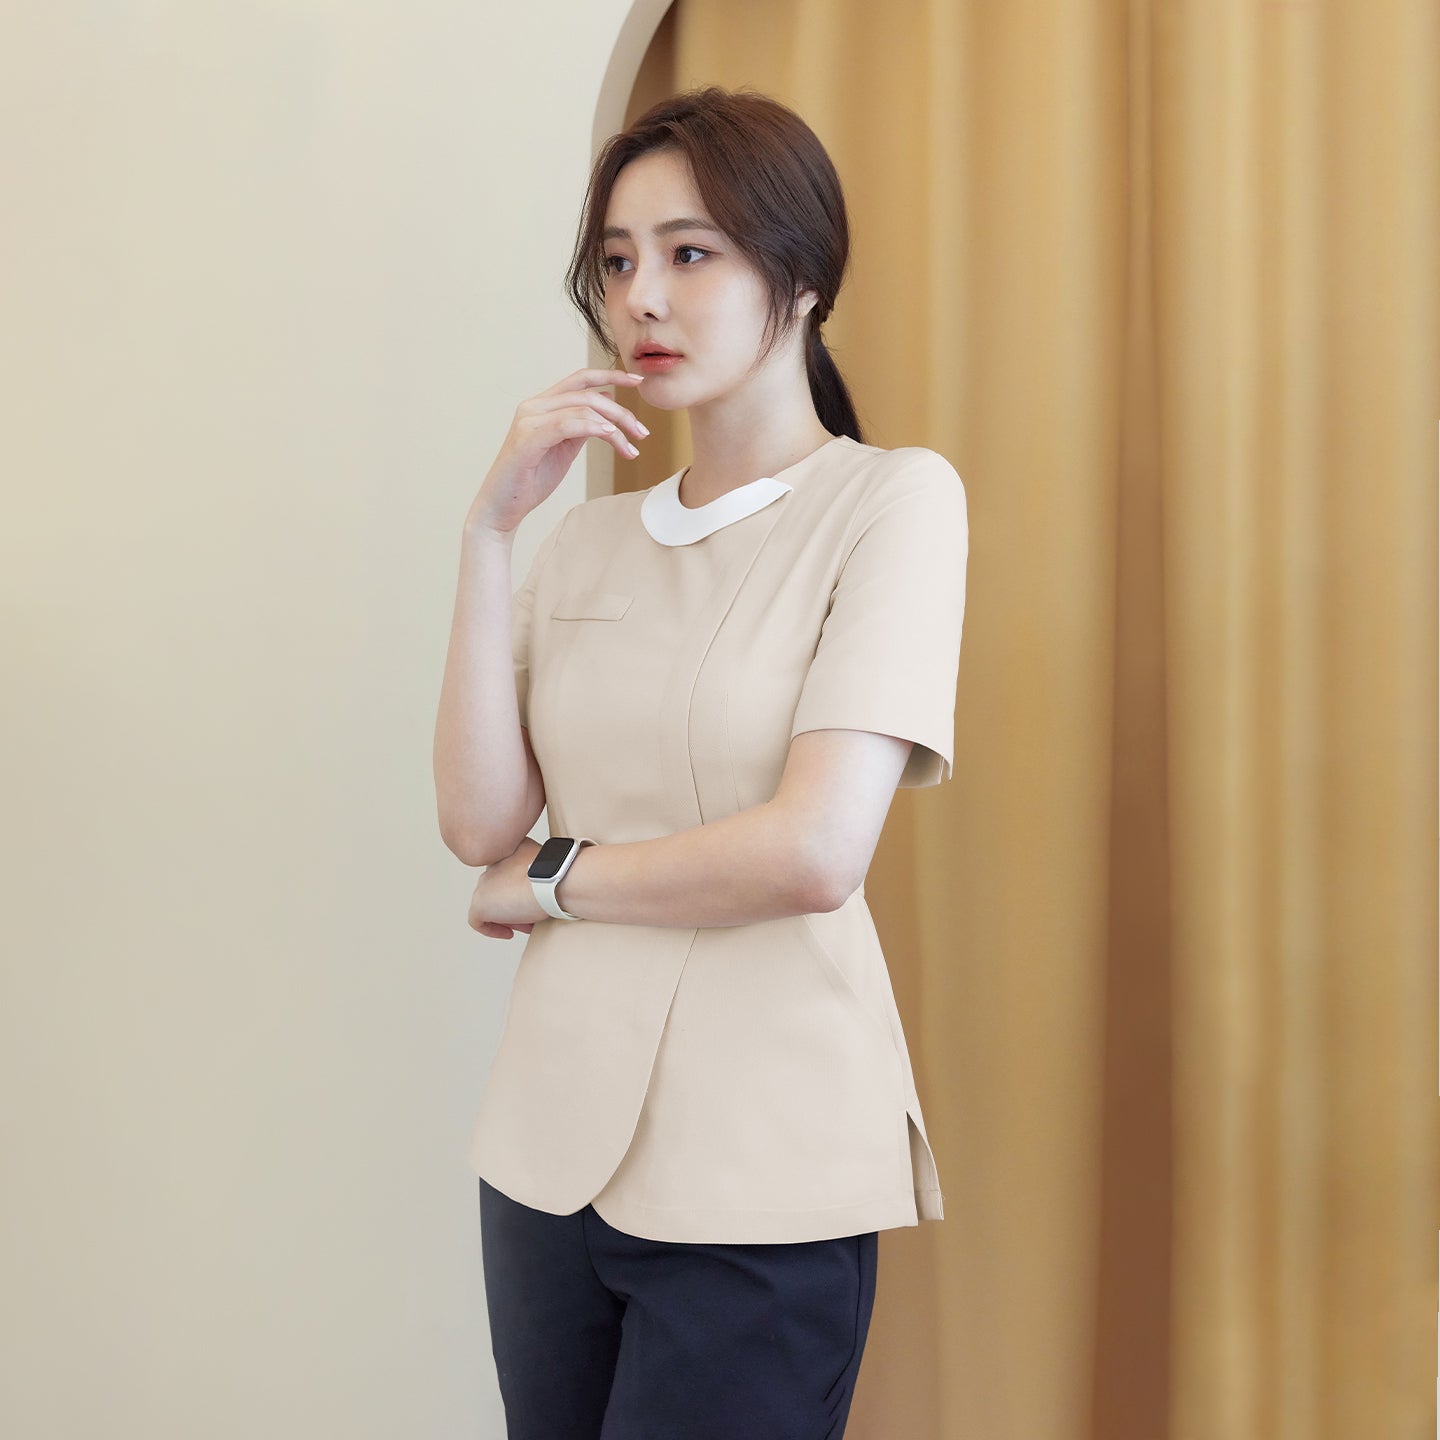 A model wearing a beige round-neck top with a front zipper, paired with dark pants, standing against a light beige and curtain background, looking thoughtful with her hand on her chinm,Beige